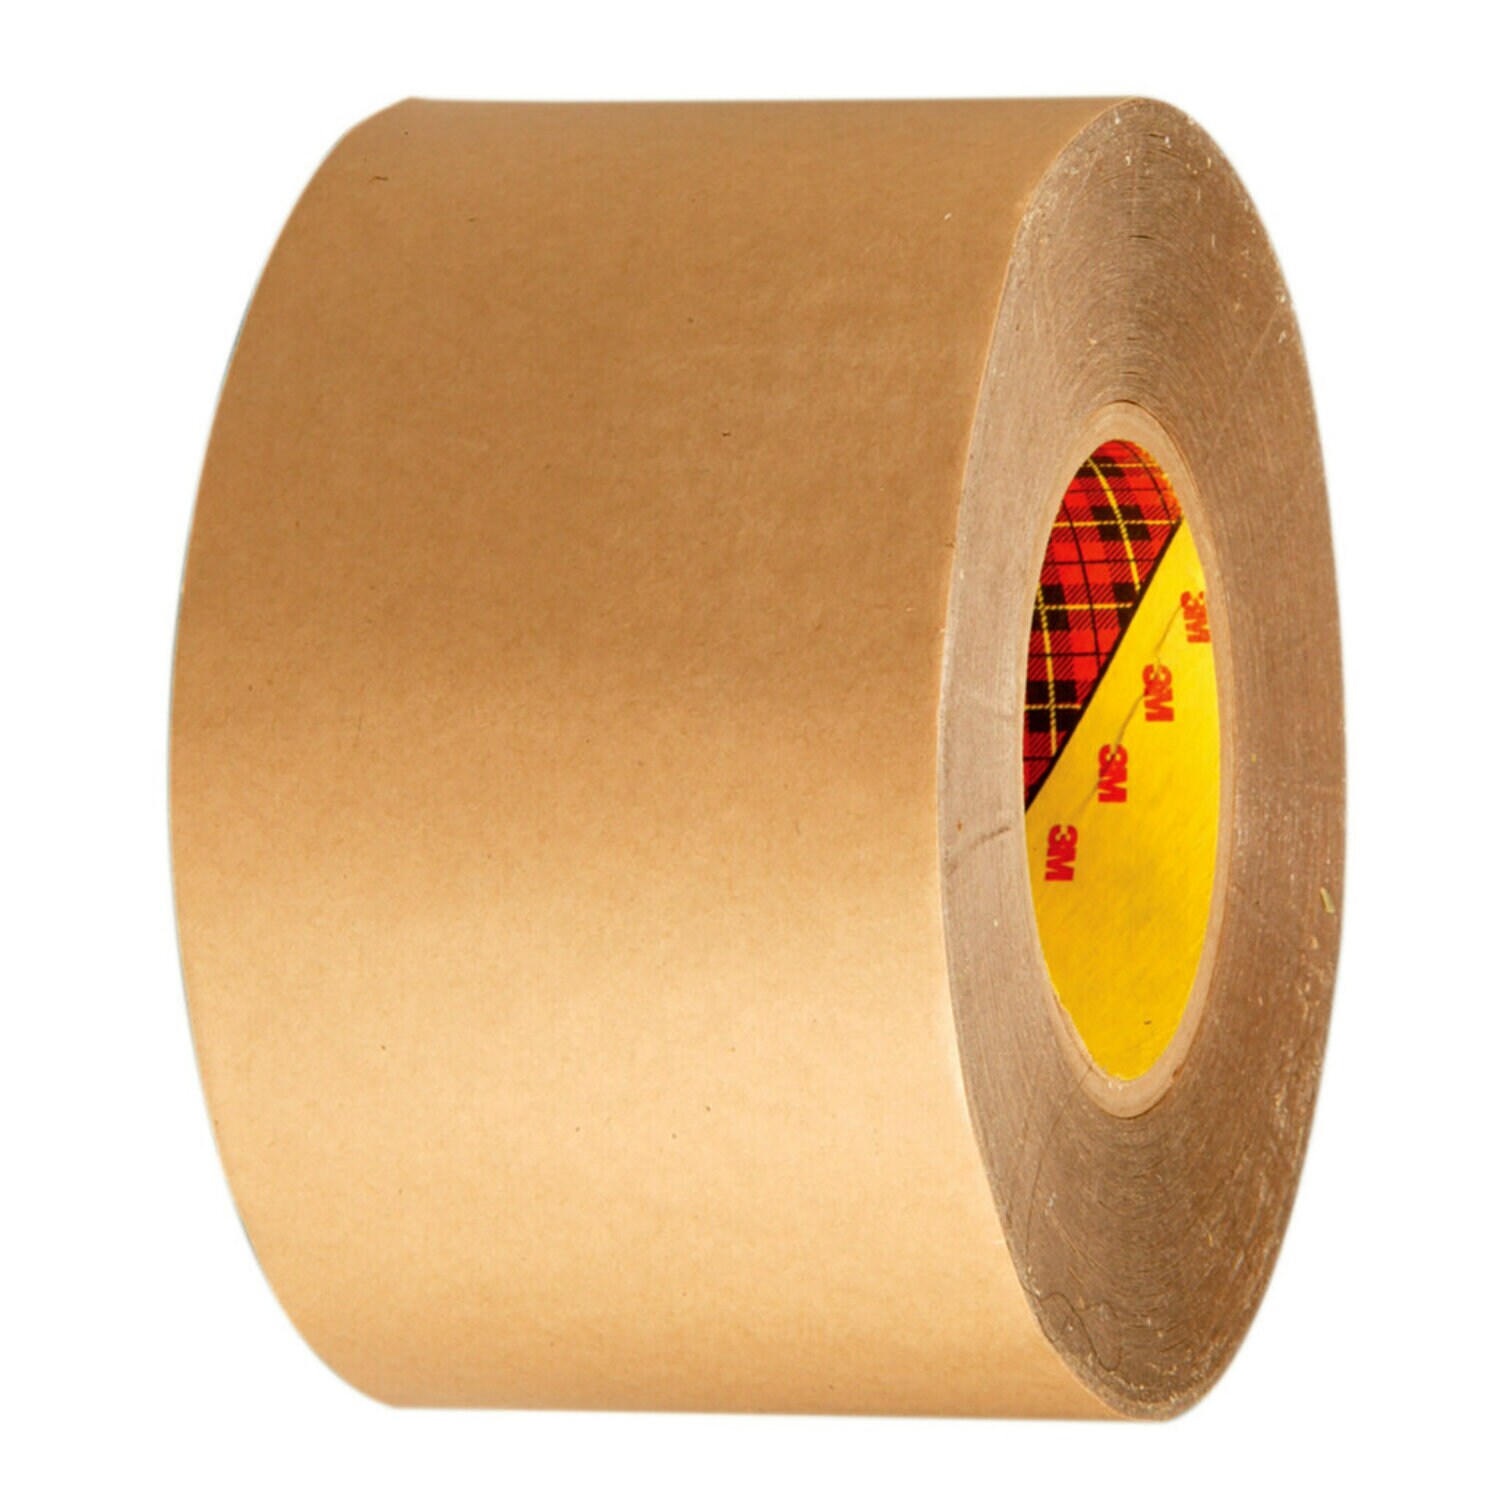 3M 9425 Double-Sided Removable Tape - 1/2 x 72 yds